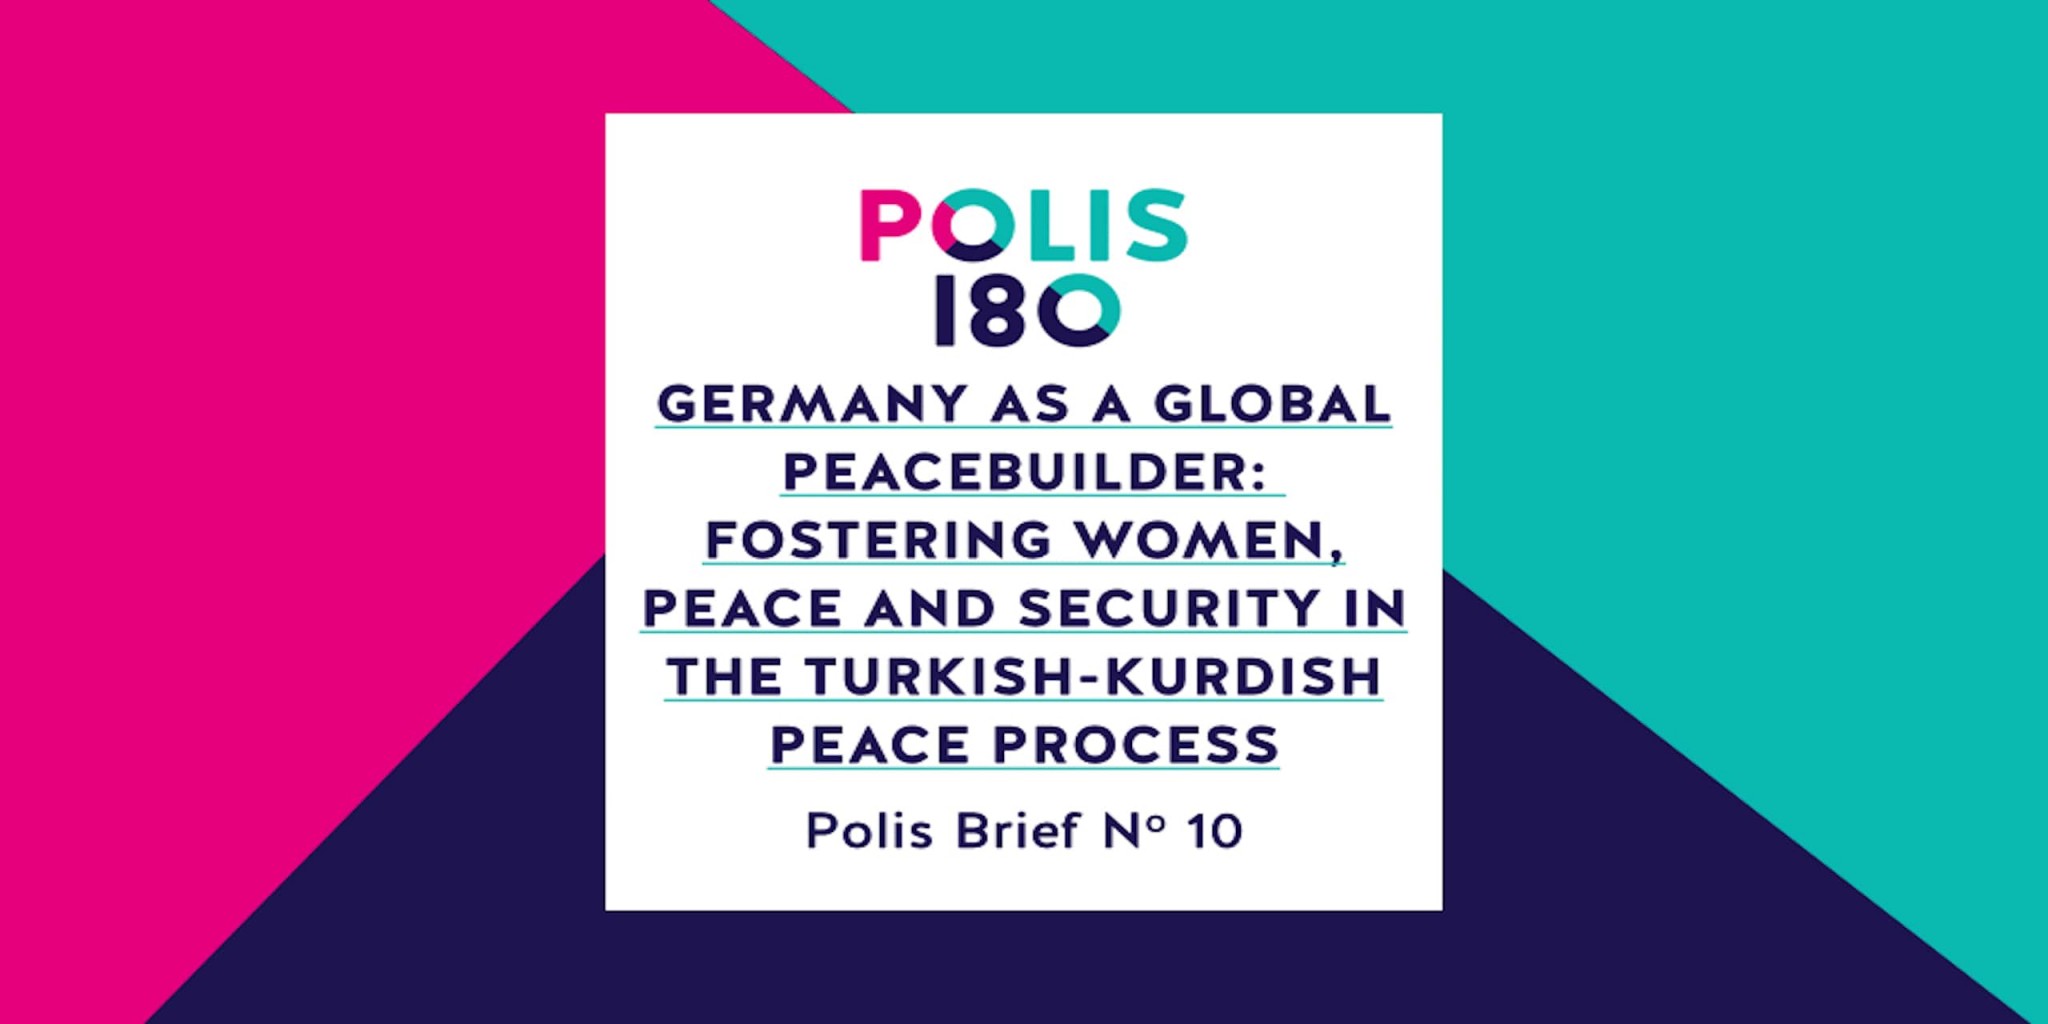 Drawing from the failed Turkish-Kurdish Peace Process and an analysis of the role of German-Turkish relations, Dilek Gürsel takes a look at the engagement of women in the Turkish-Kurdish peace process and outlines policy recommendations for Germany on how to support the implementation of the Women, Peace and Security agenda in Turkey. 